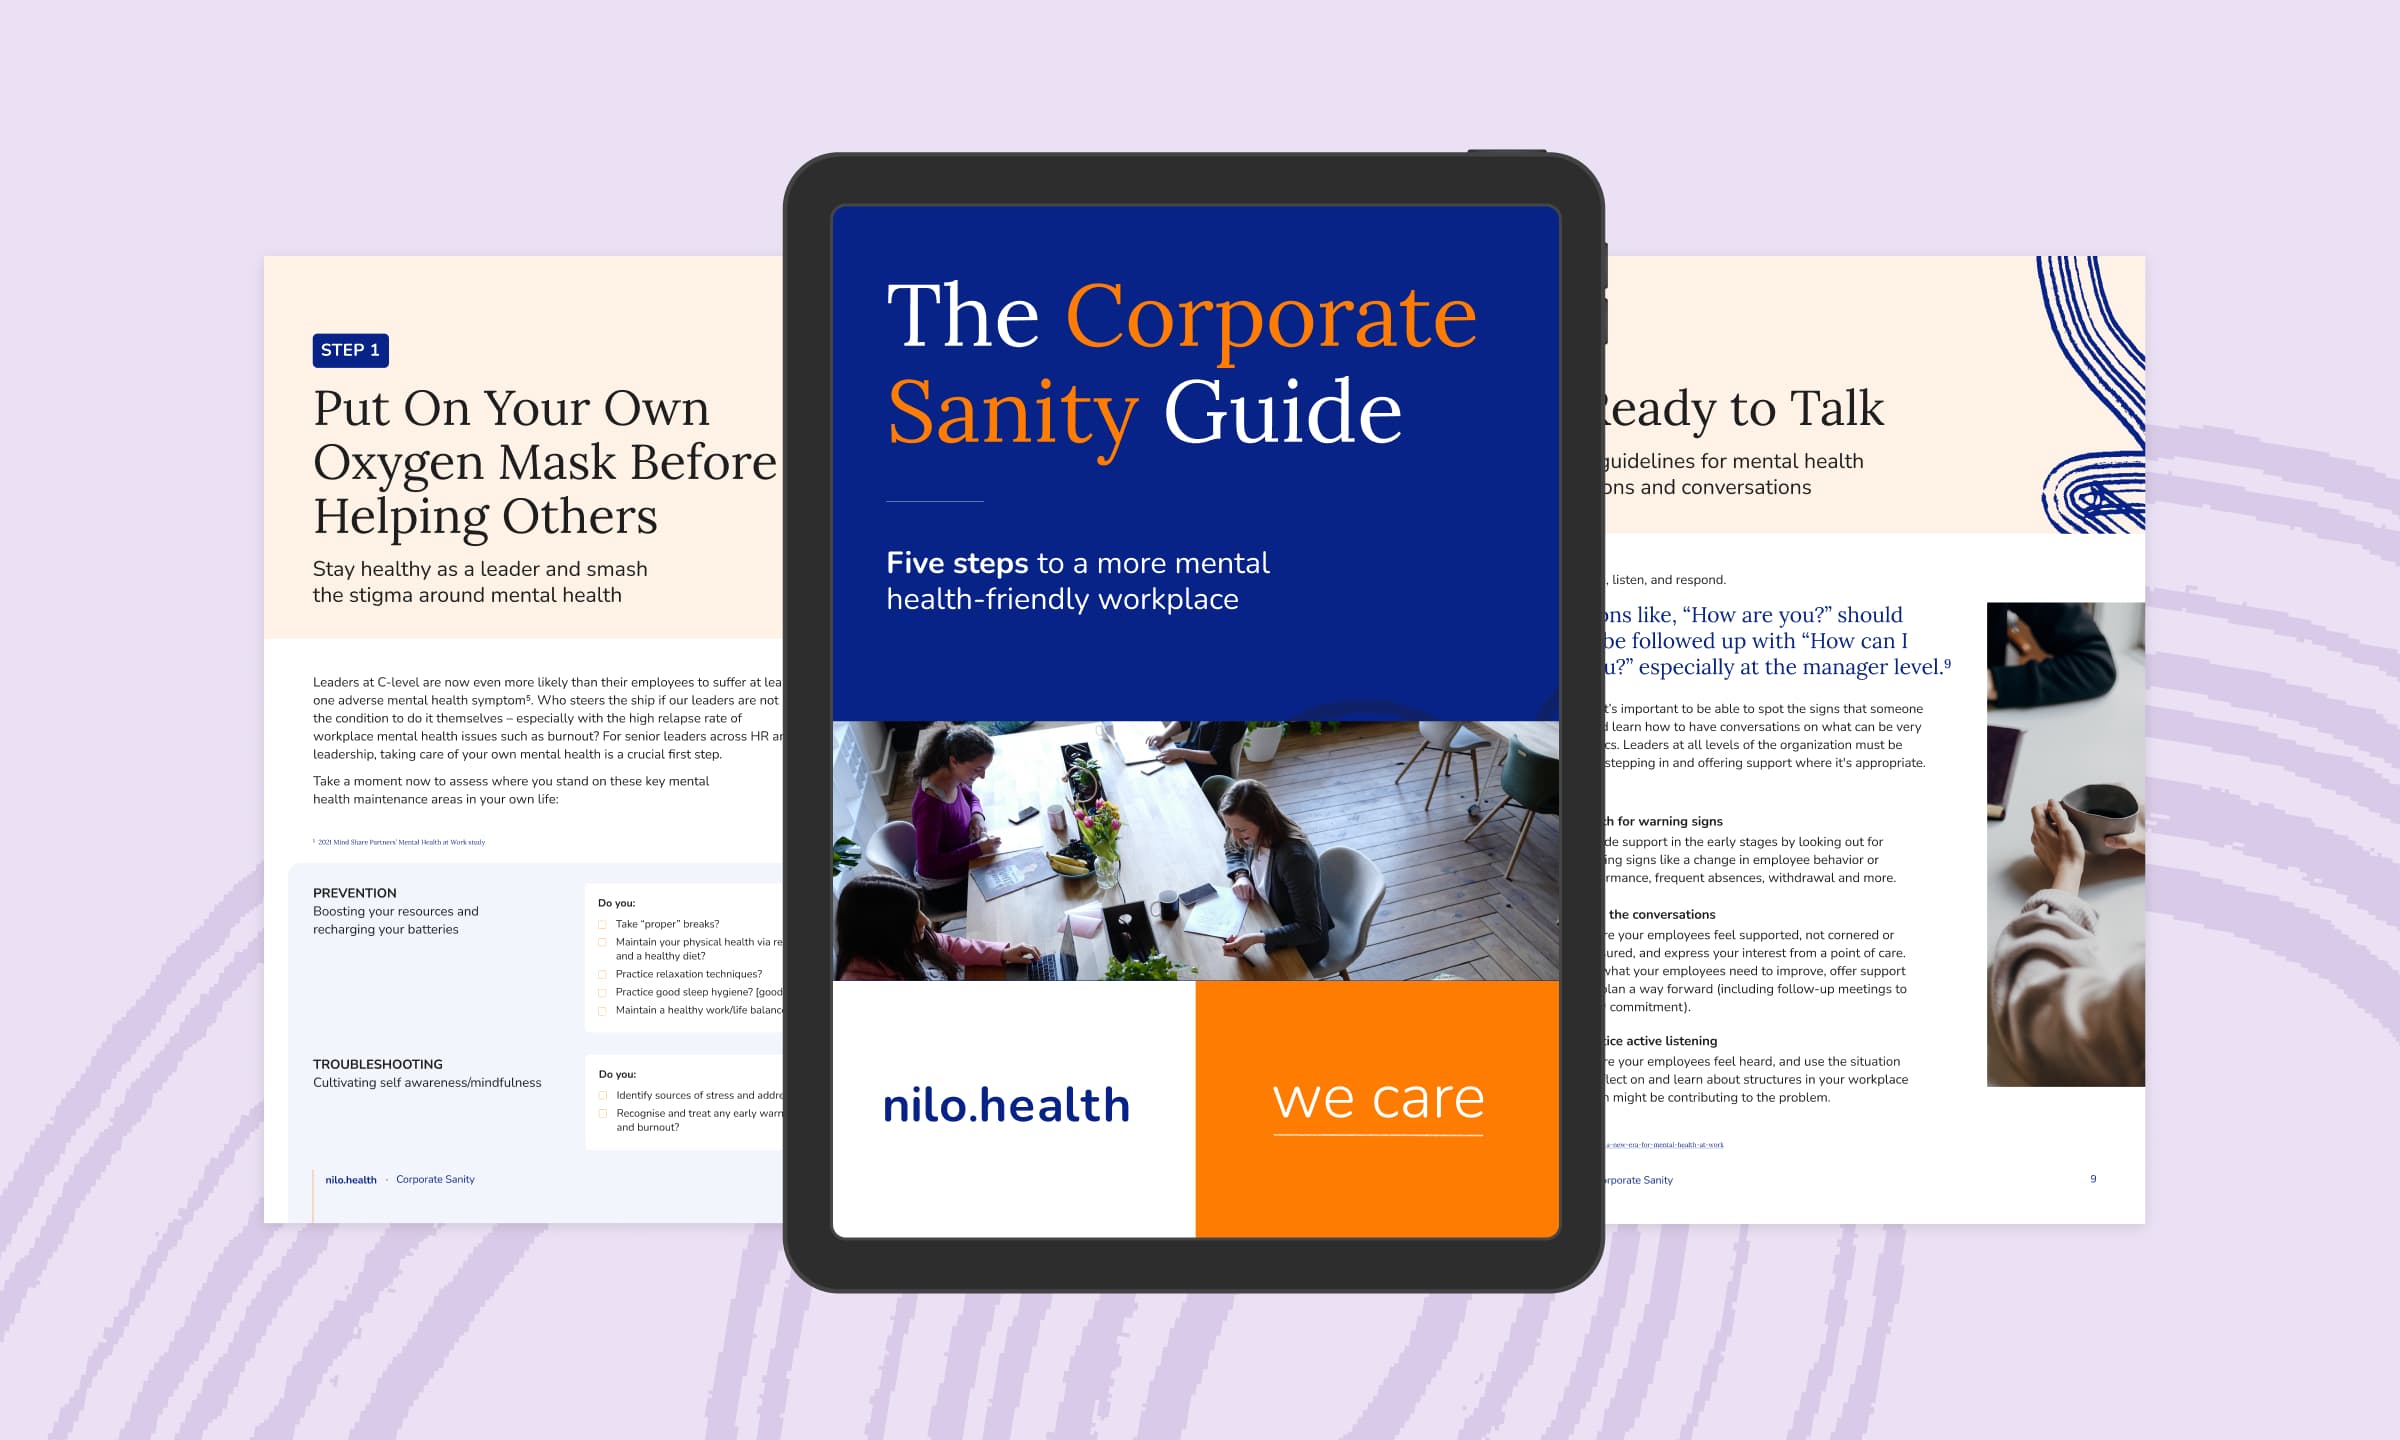 Der Corporate Sanity Guide